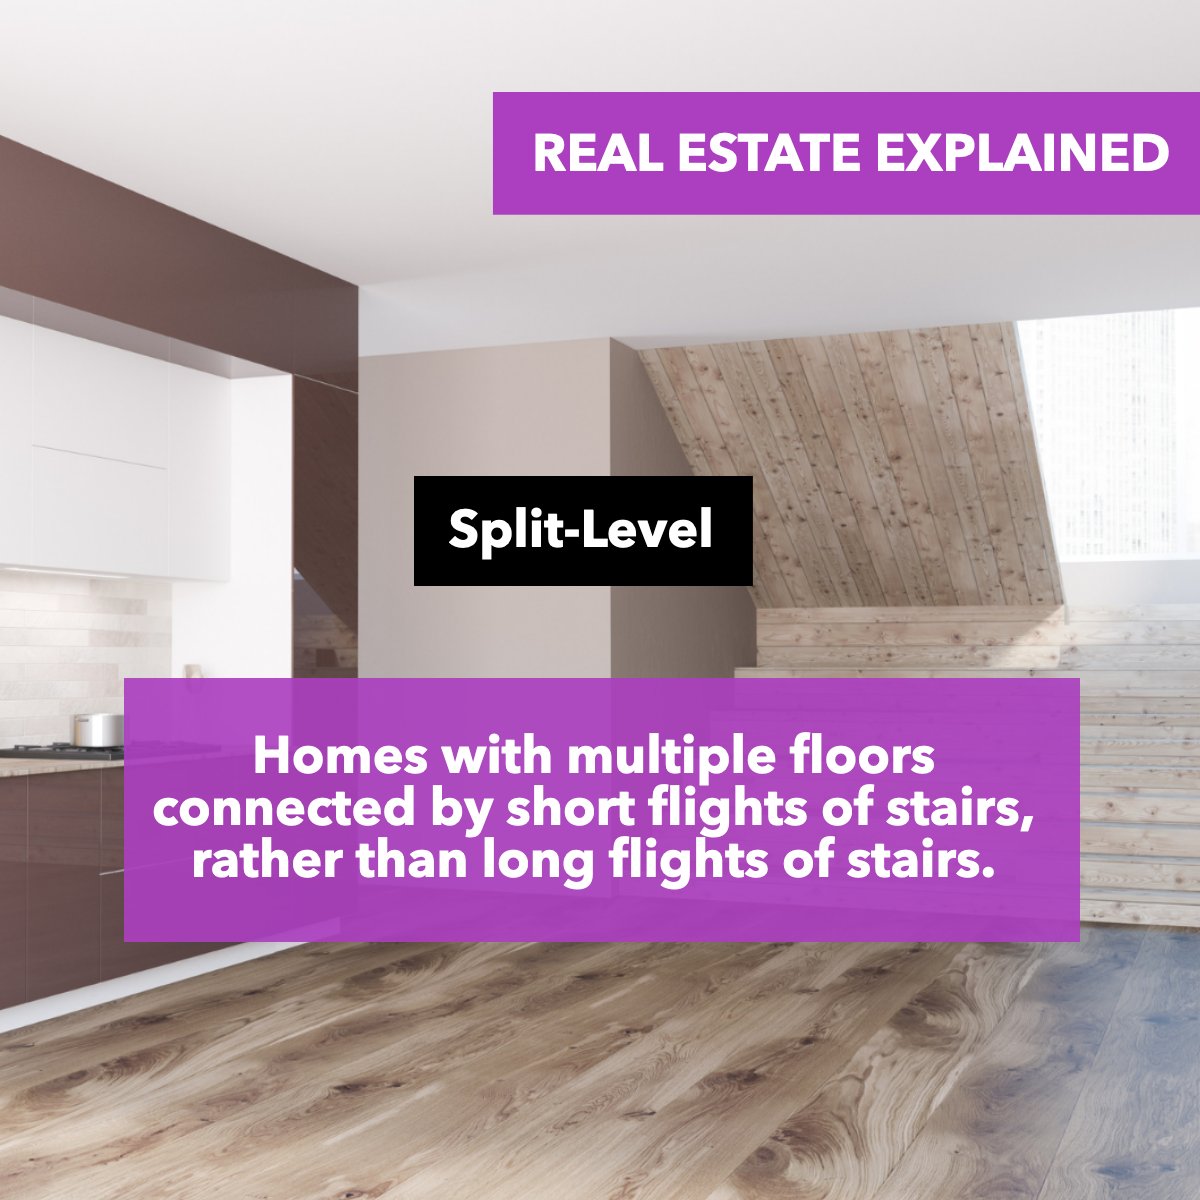 Did you know what a Spit-Level is 🤔

Is this the type of house that you like

#splitlevelremodel #splitlevelhome #splitleveldesign
#social